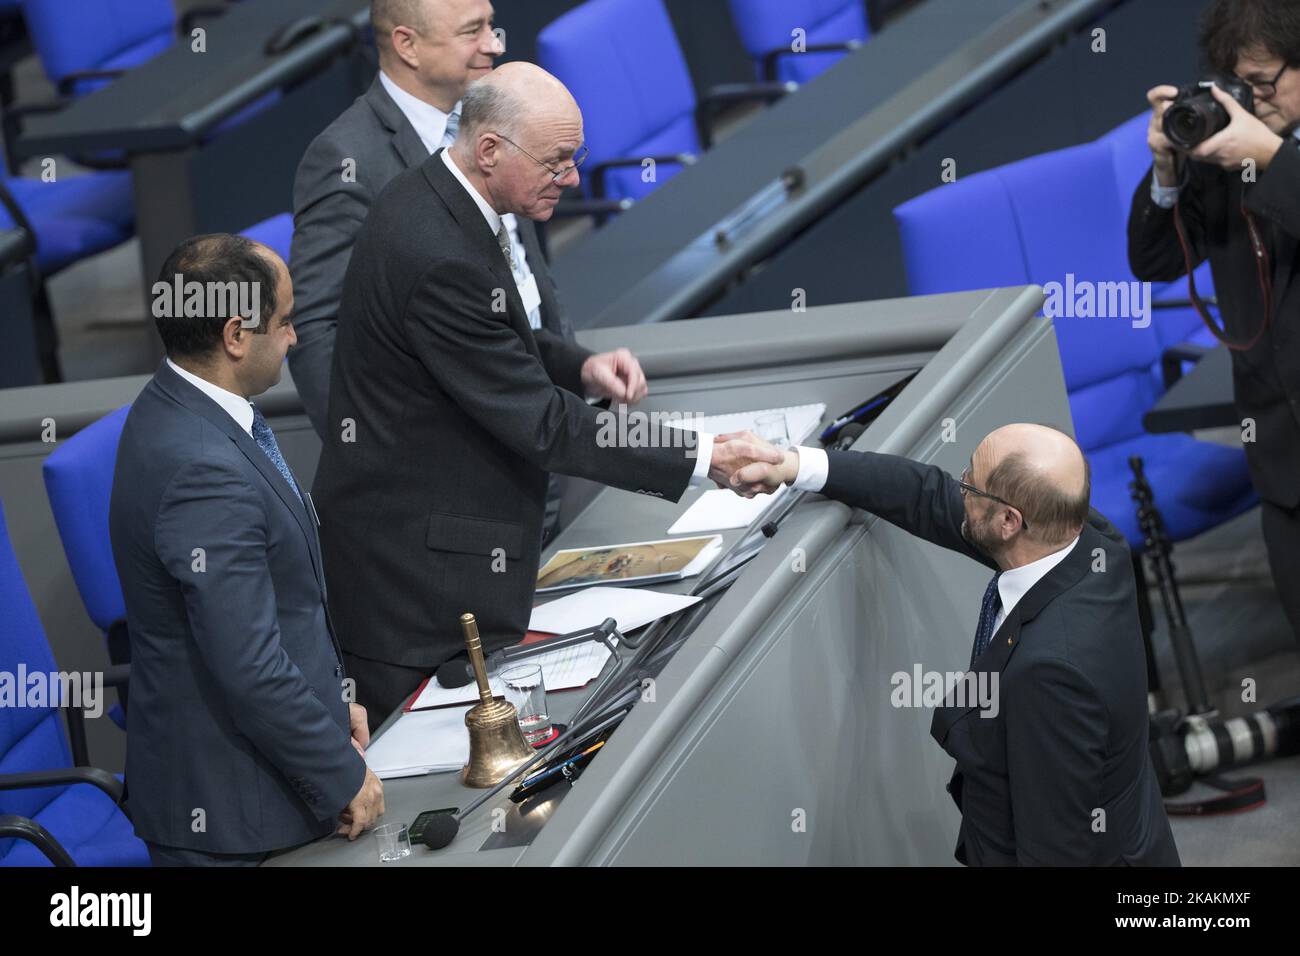 President of the Bundestag Norbert Lammert (L) shake hands with SPD chancellor candidate and former President of the European Parliament Martin Schulz at the end of the presidential election by the Bundesversammlung (Federal Assembly) at the Reichstag in Berlin, Germany on February 12, 2017. Steinmeier, 61, obtained 931 votes out of 1,260 being the official candidate of the government parties CDU/CSU and SPD and supported from FDP and Green party, against poverty researcher Christoph Butterwegge, nominated by the left party Die Linke and Albrecht Glaser, nominated by the far right party AfD (A Stock Photo